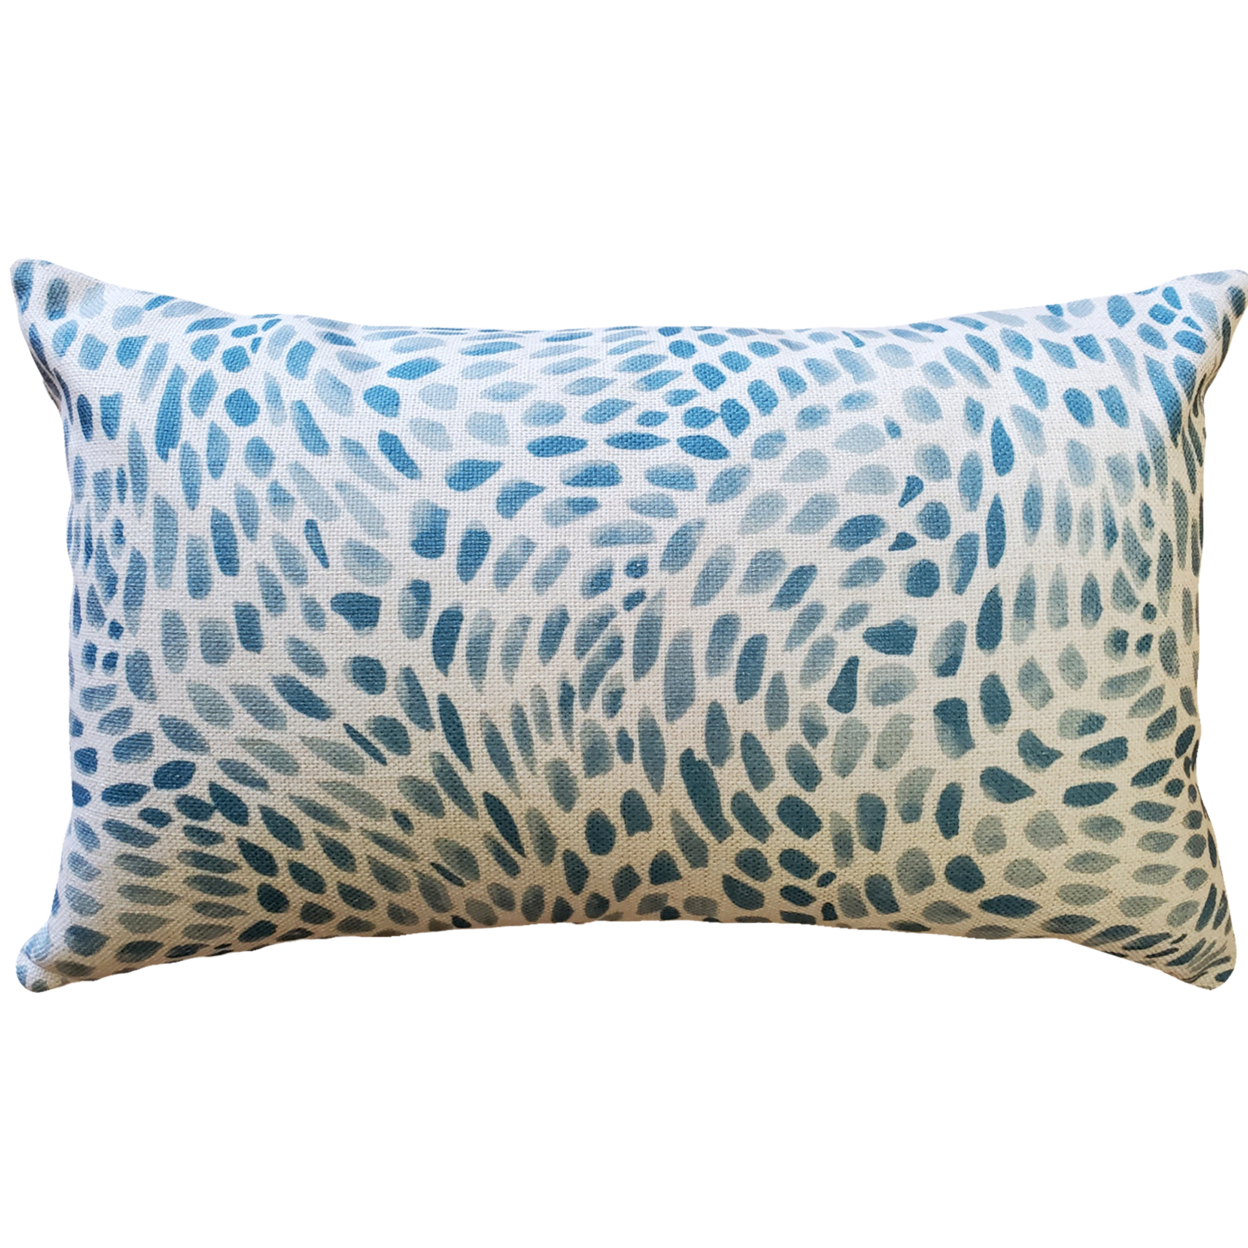 Matisse Dots Toile Blue Throw Pillow 12x19 Inches Square, Complete Pillow With Polyfill Pillow Insert